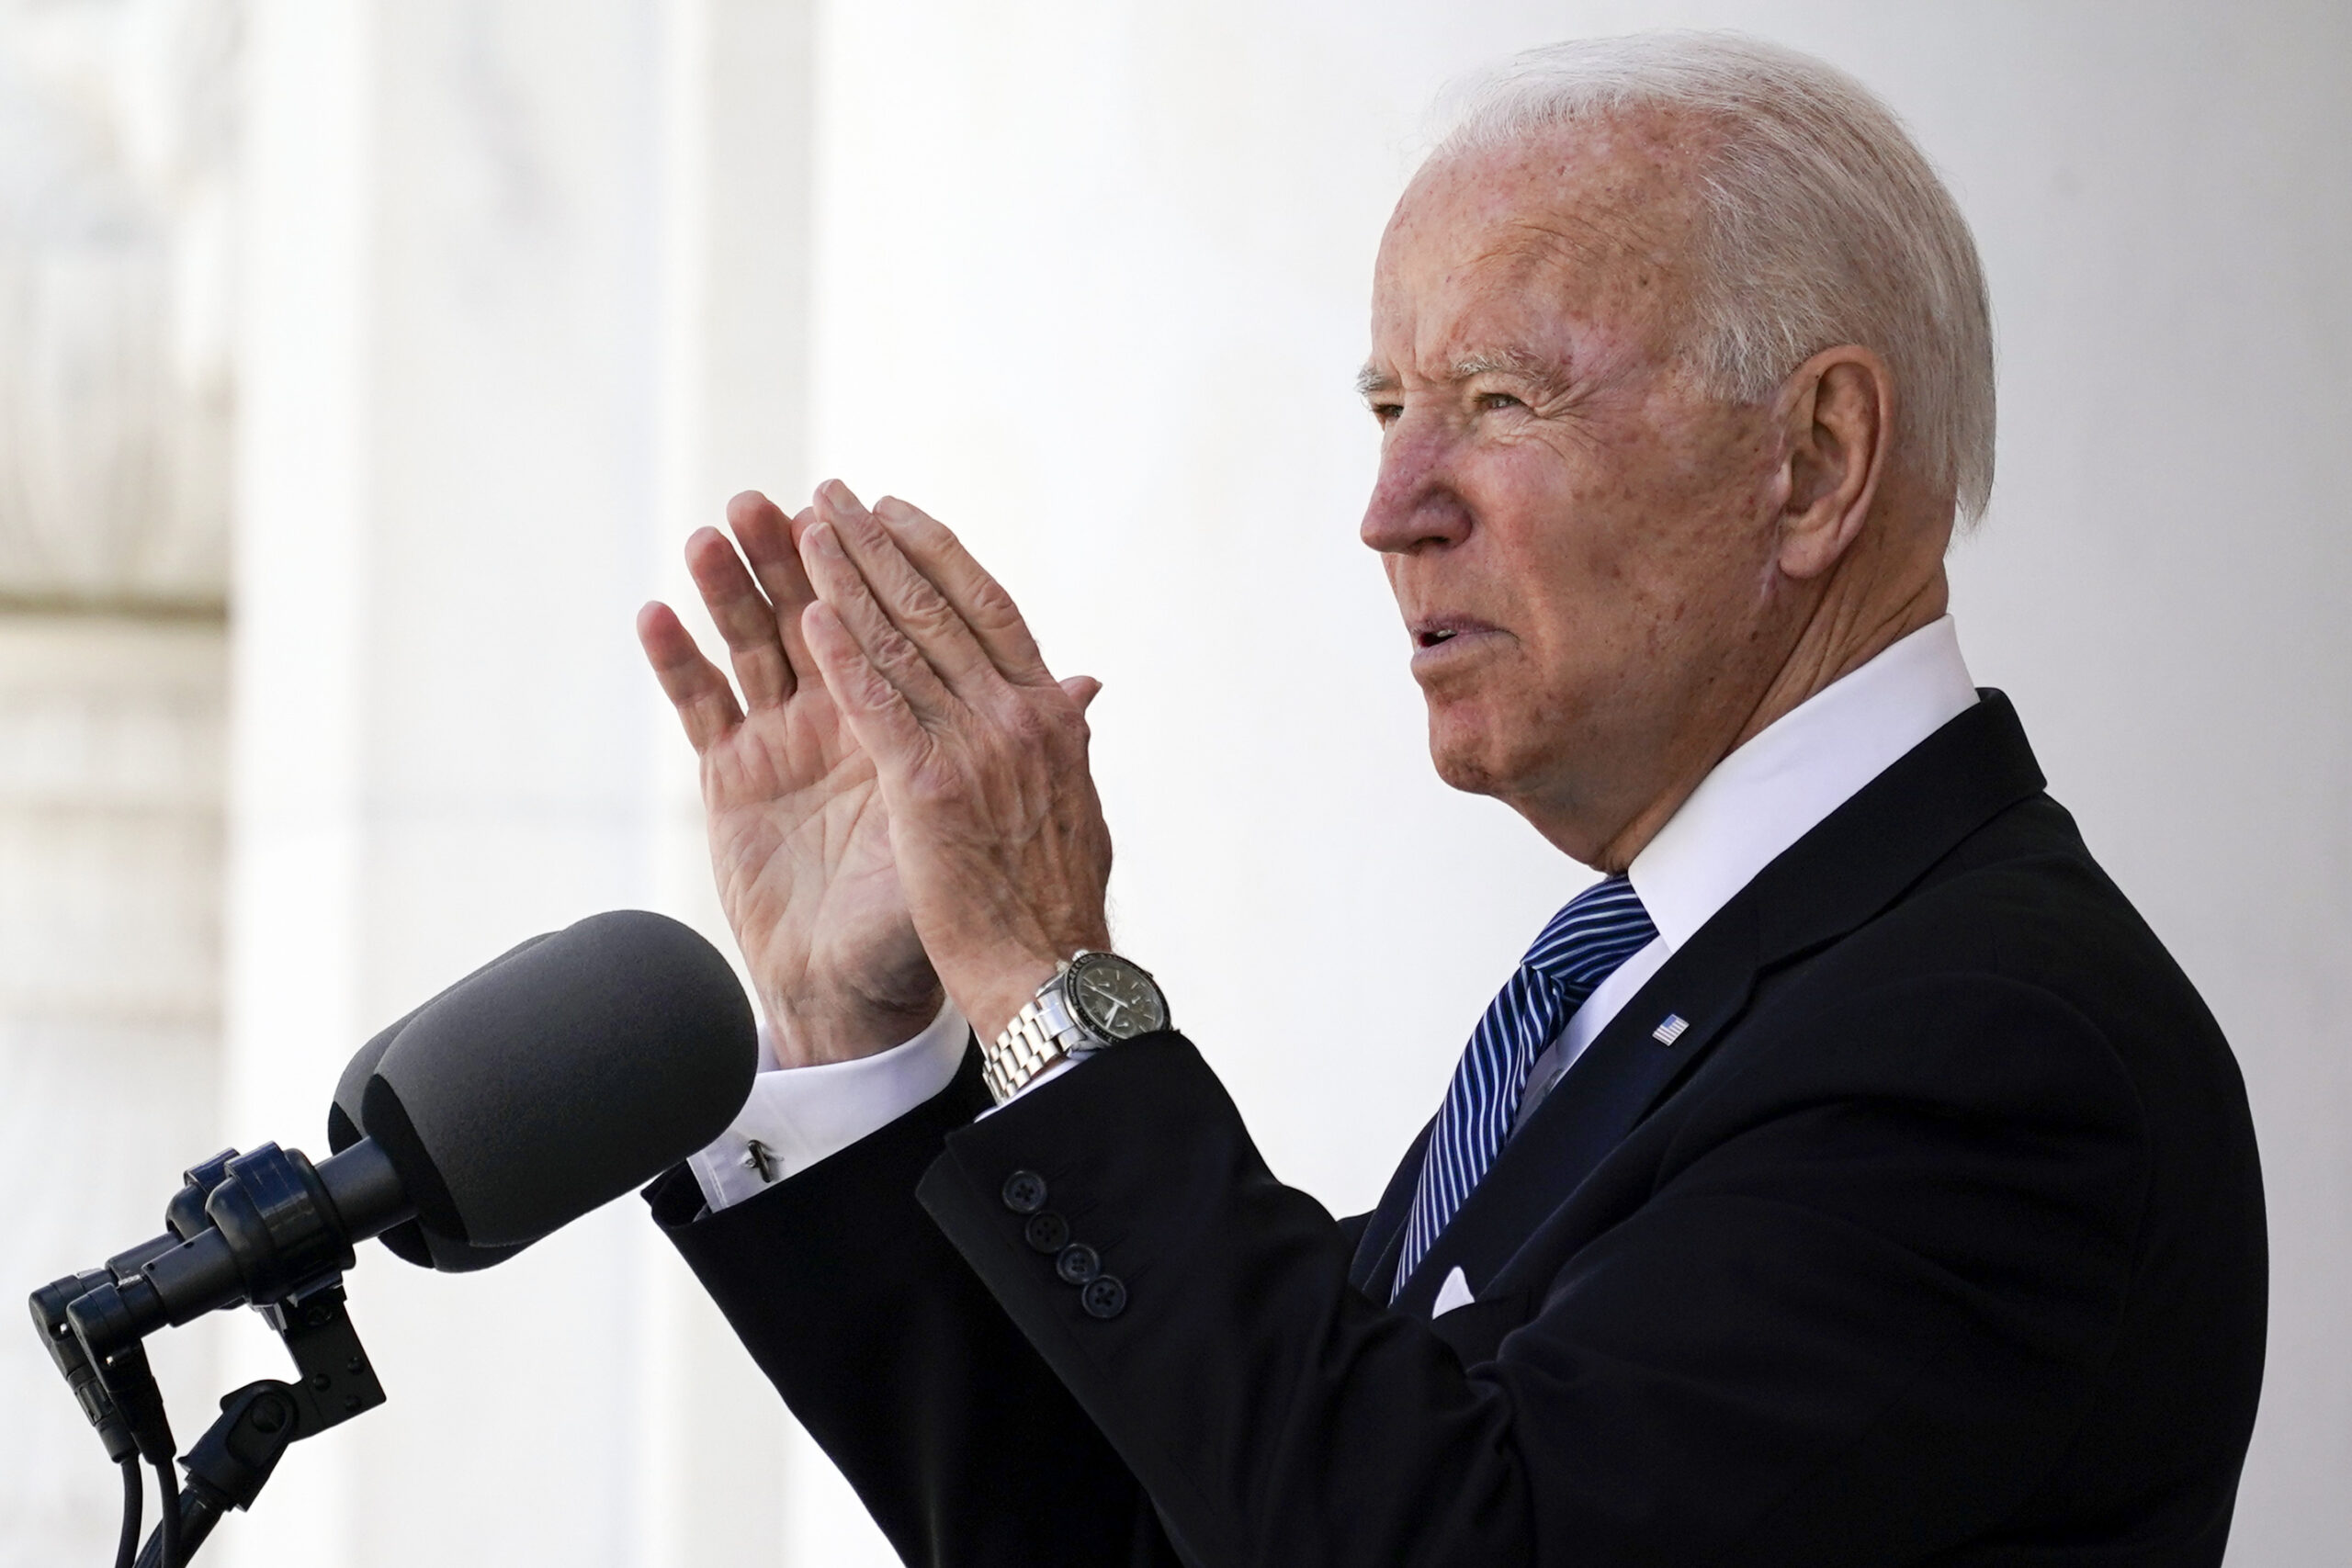 President Joe Biden speaks at Arlington National Cemetery on Memorial Day, Monday, May 31, 2021, in Arlington, Va.( Biden on Tuesday will take part in a remembrance of one of the nation’s darkest _ and largely forgotten _ moments of racial violence, marking the 100th anniversary of a massacre in Tulsa, Oklahoma that wiped out a thriving Black community. AP Photo/Alex Brandon)